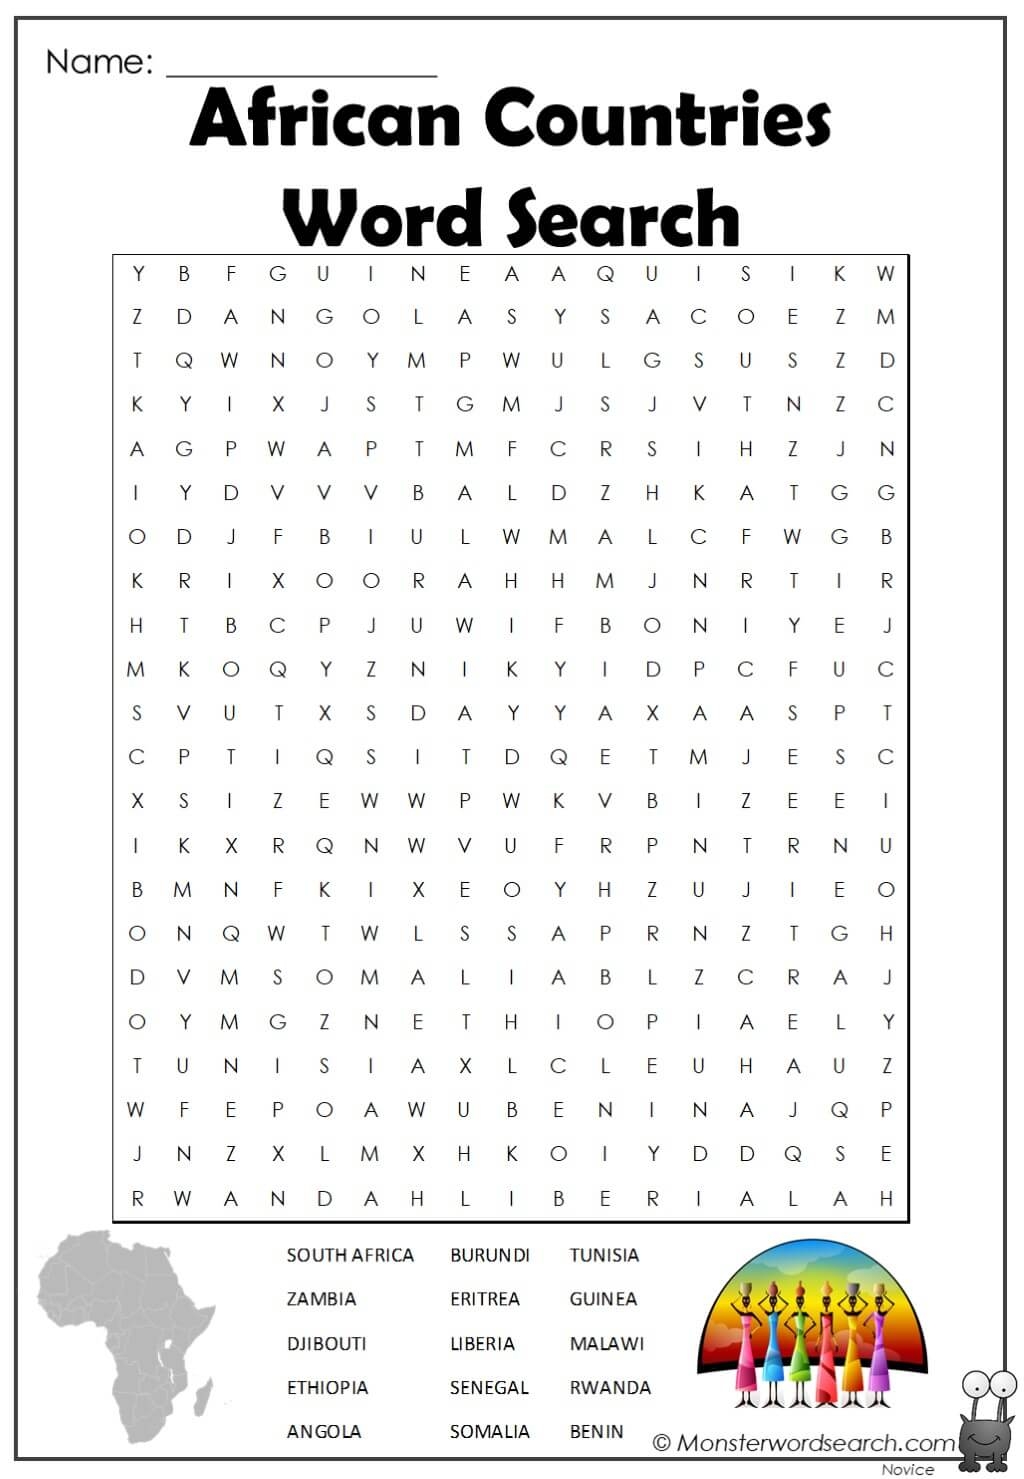 African Countries Word Search Monster Word Search